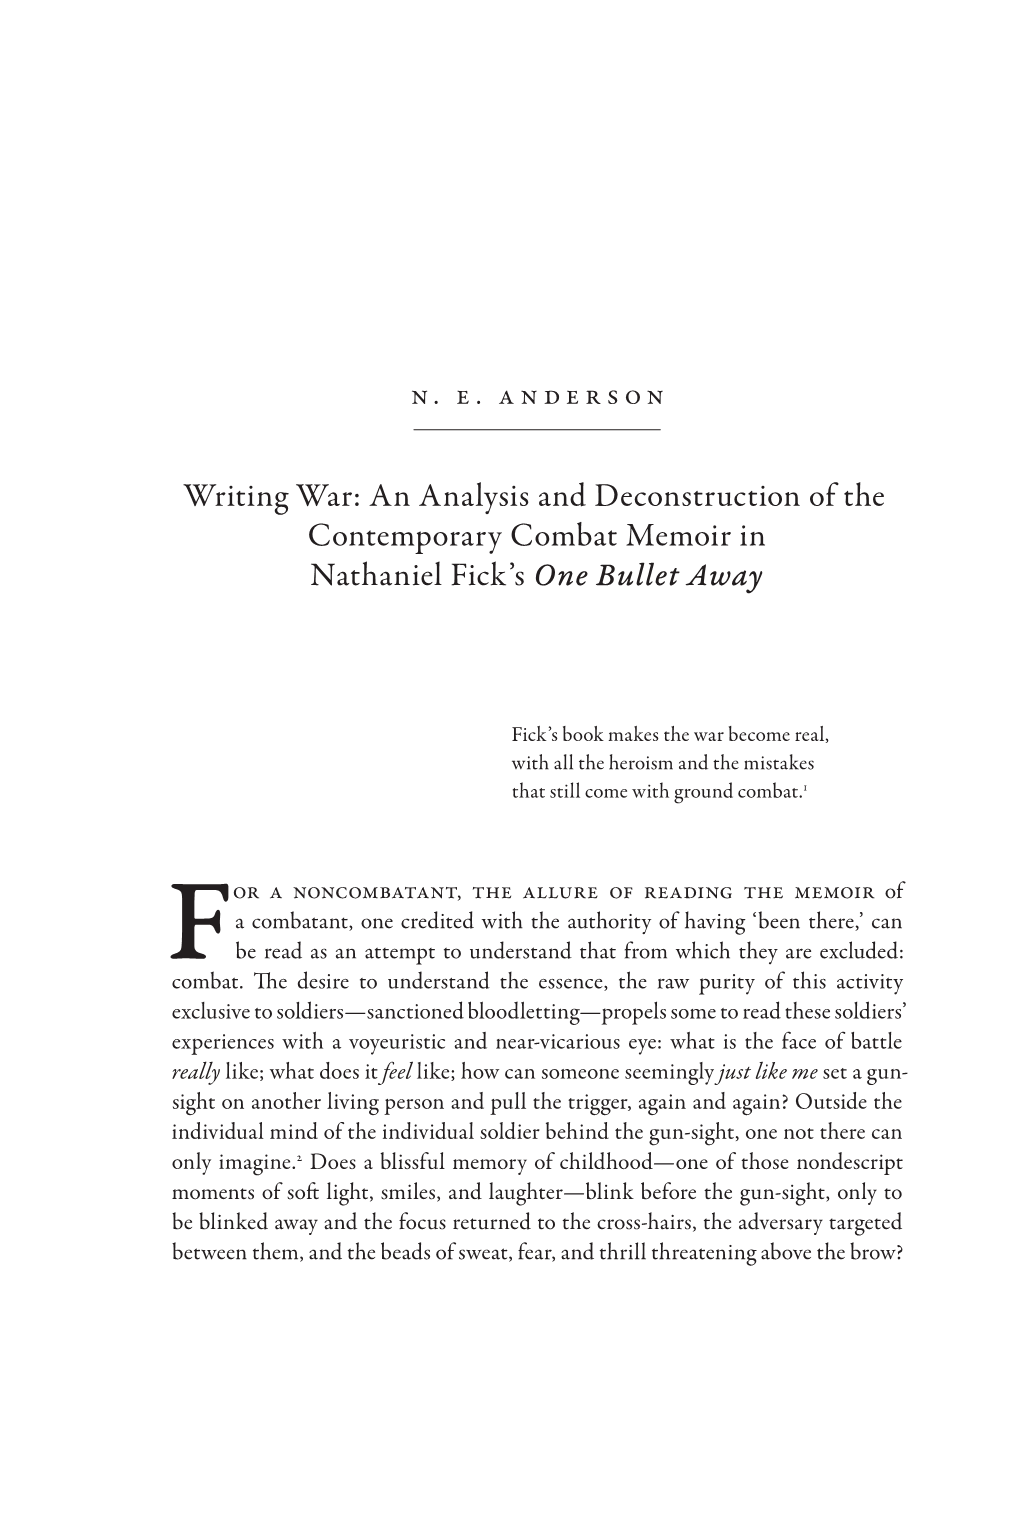 An Analysis and Deconstruction of the Contemporary Combat Memoir in Nathaniel Fick’S One Bullet Away